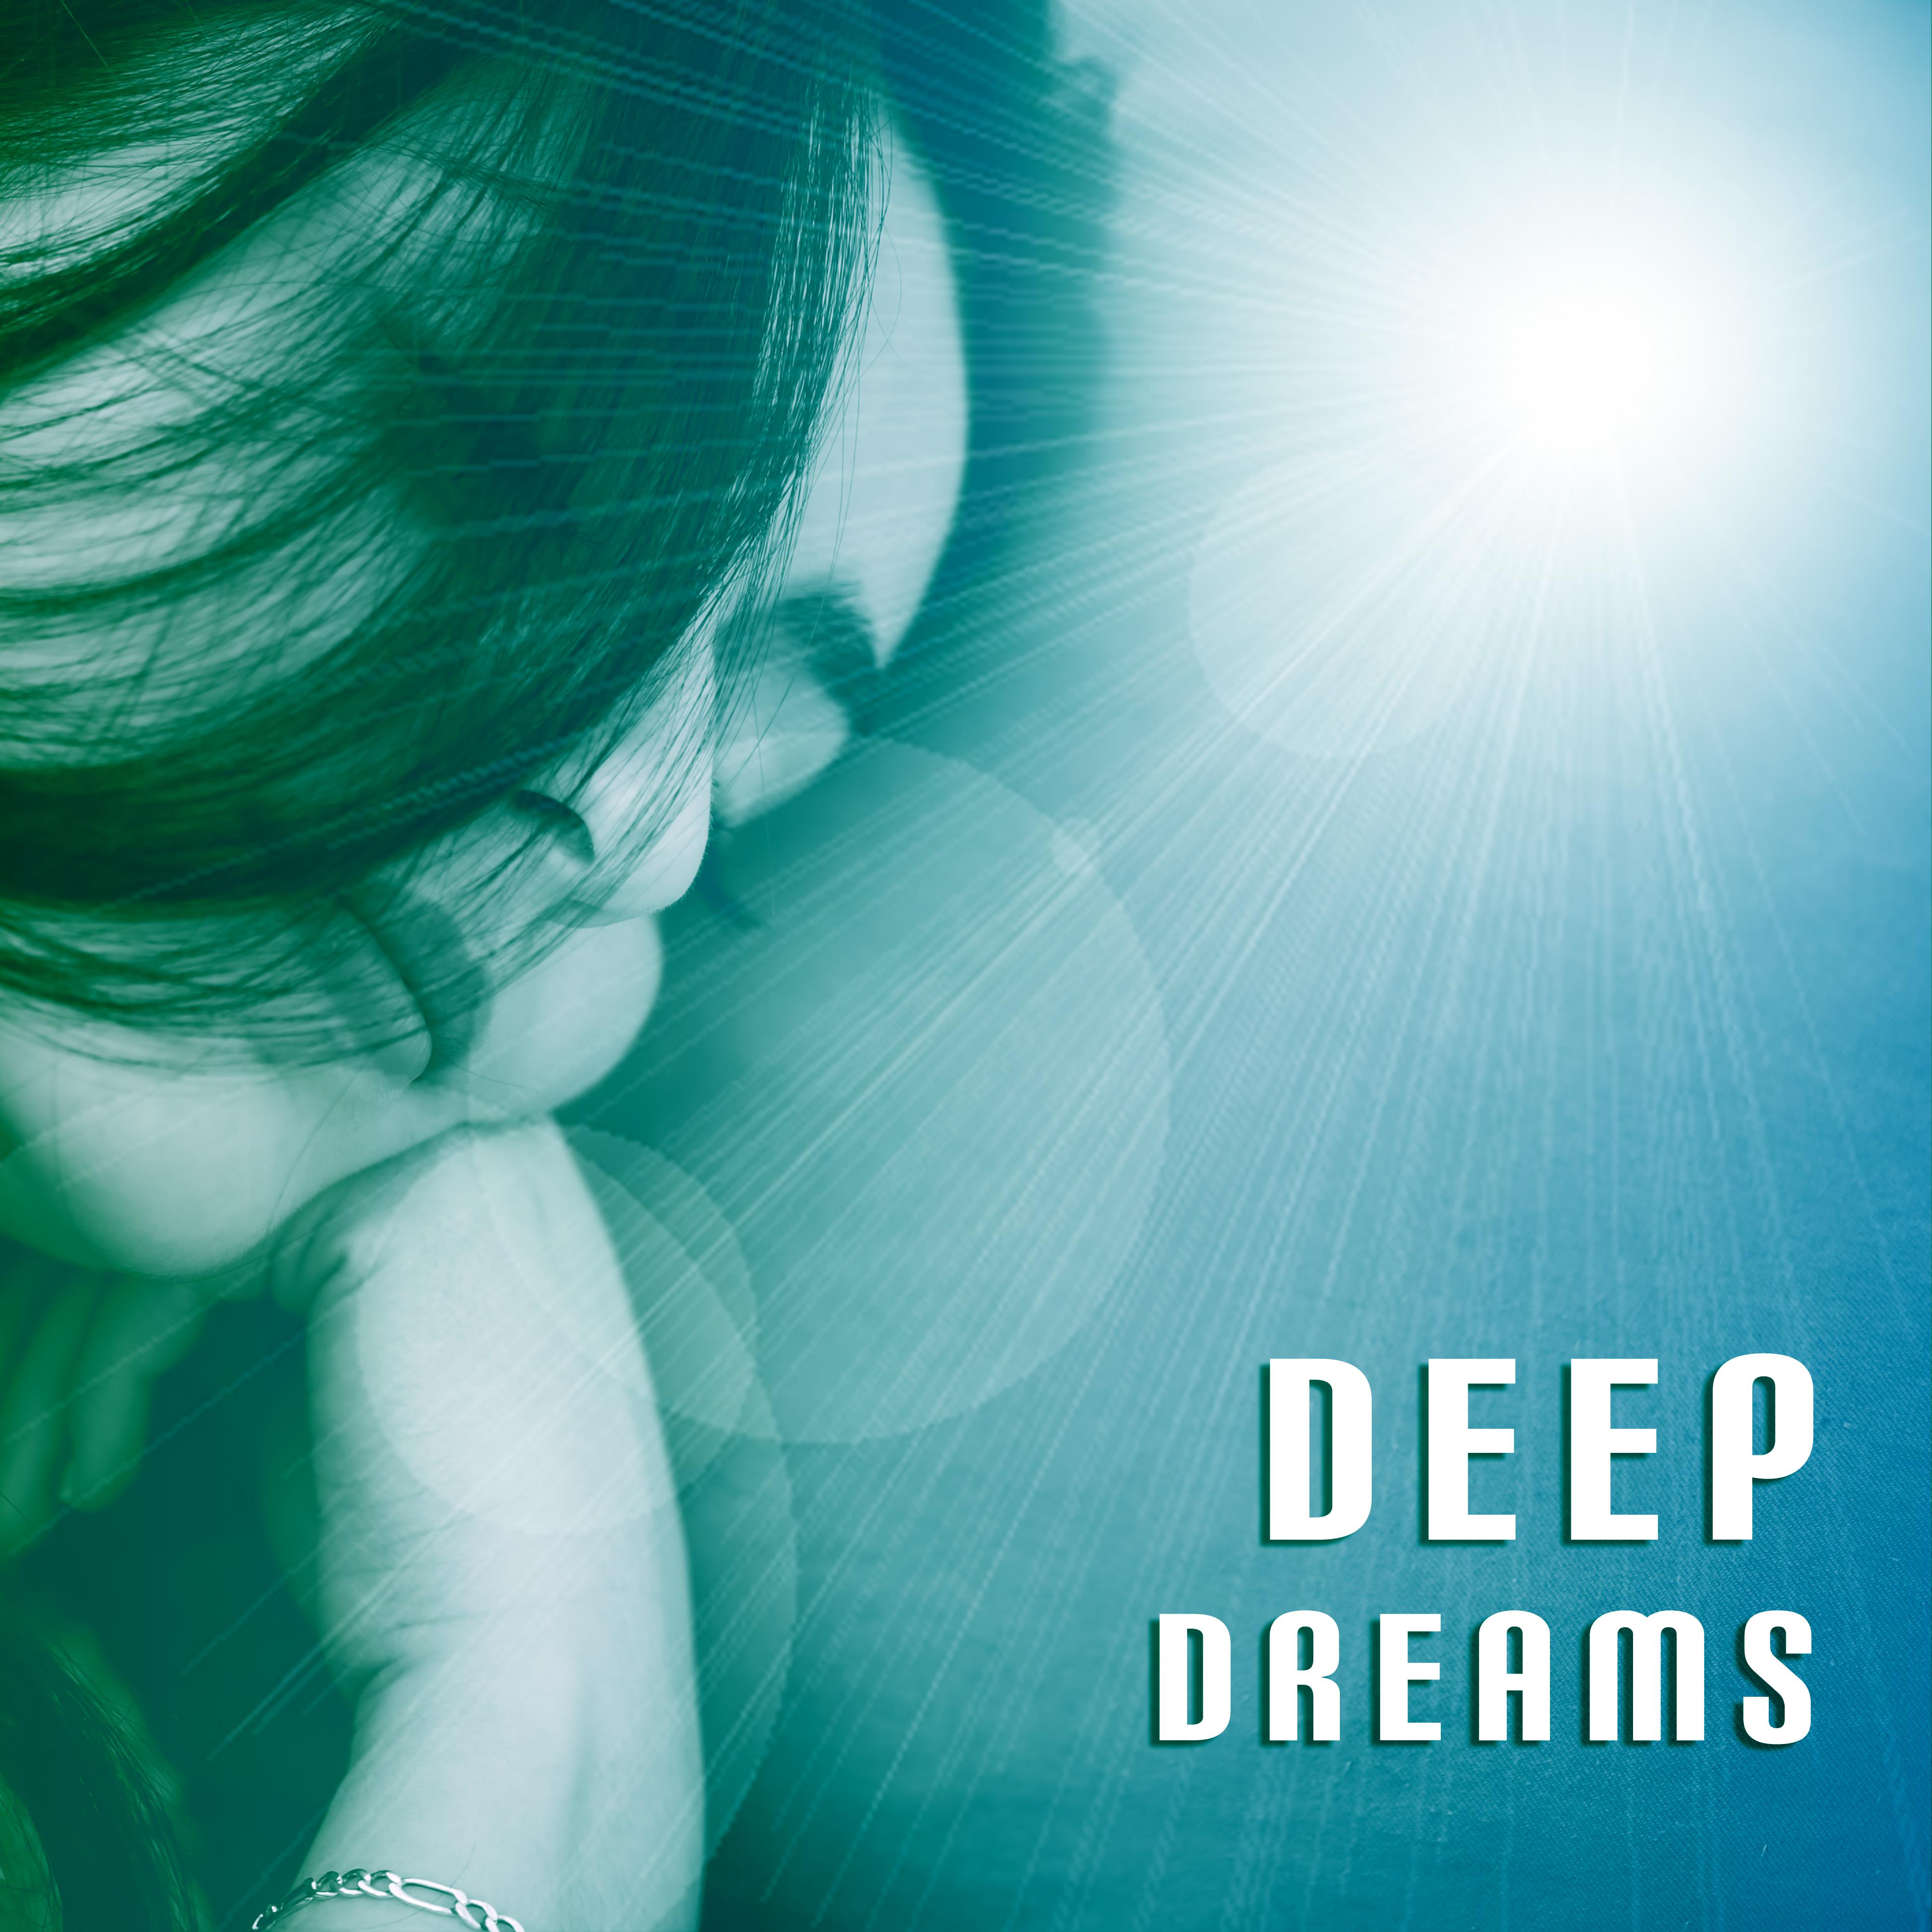 Deep Dreams – Soft Music for Sleep, Peaceful Sounds, Calm Lullaby, Stress Relief, Bedtime, New Age